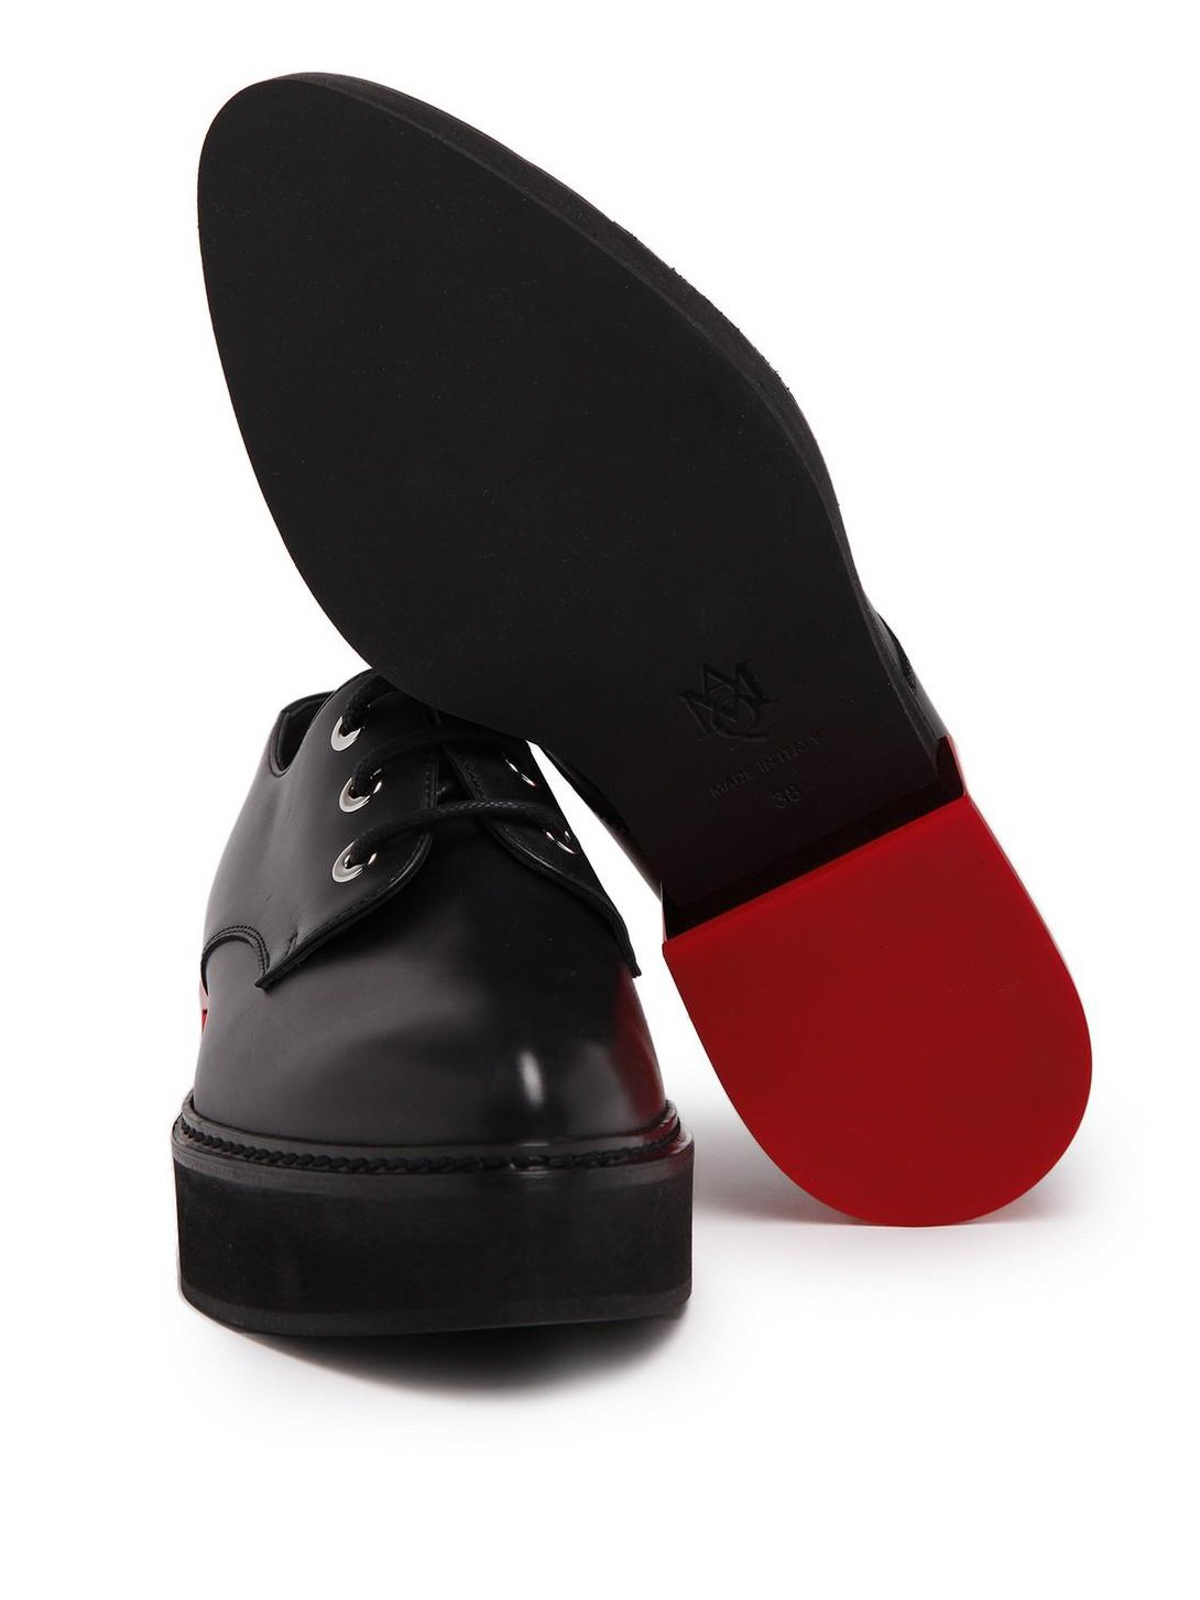 Lace-ups shoes Alexander Mcqueen - Red heel lace-up leather